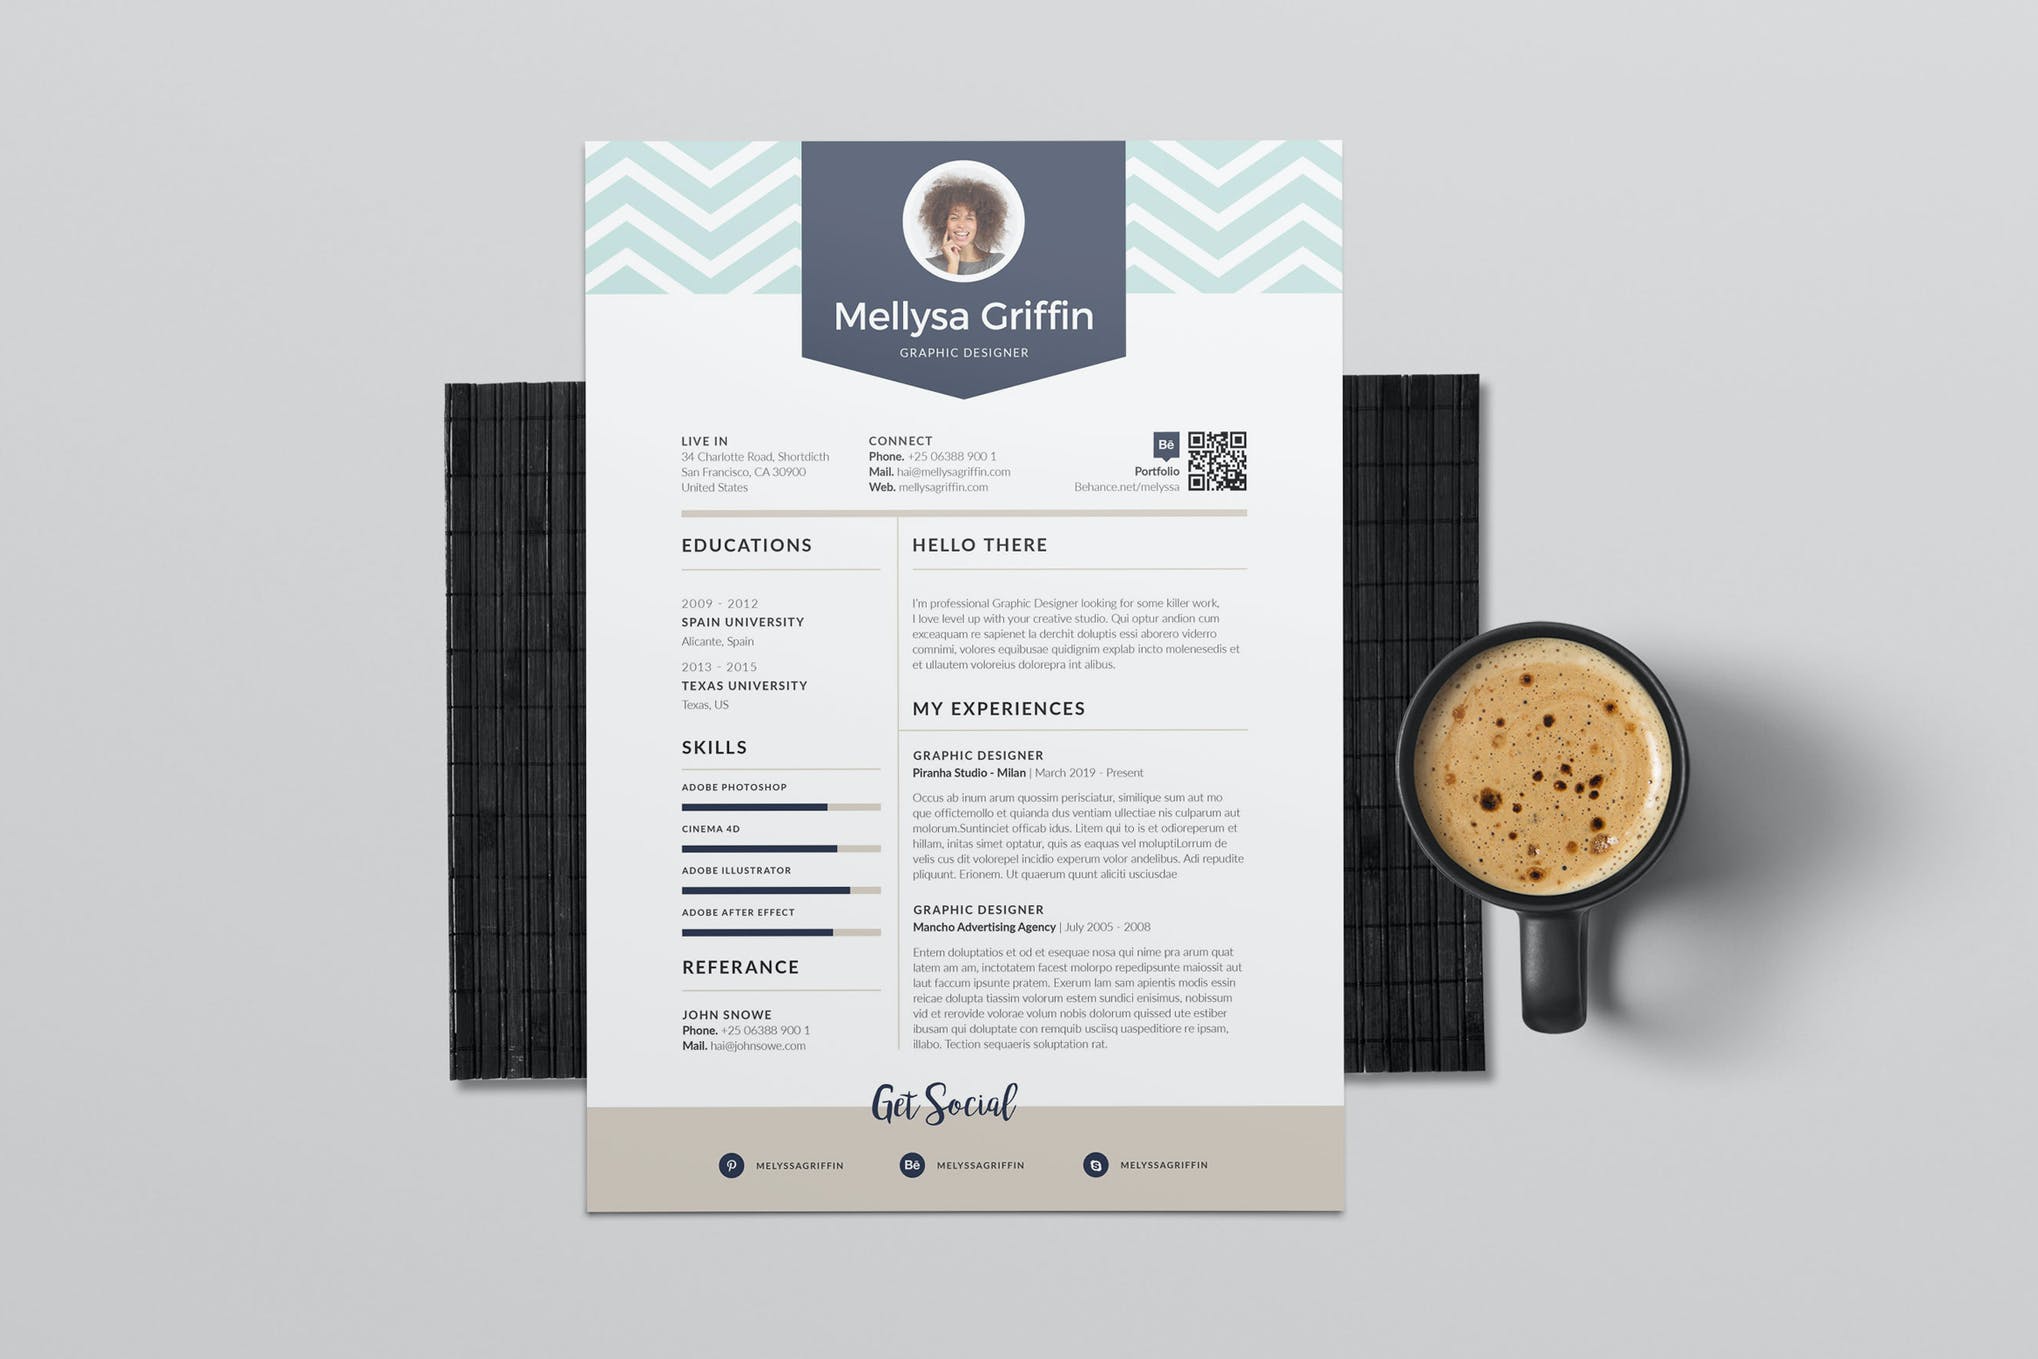 InDesign Resume Template